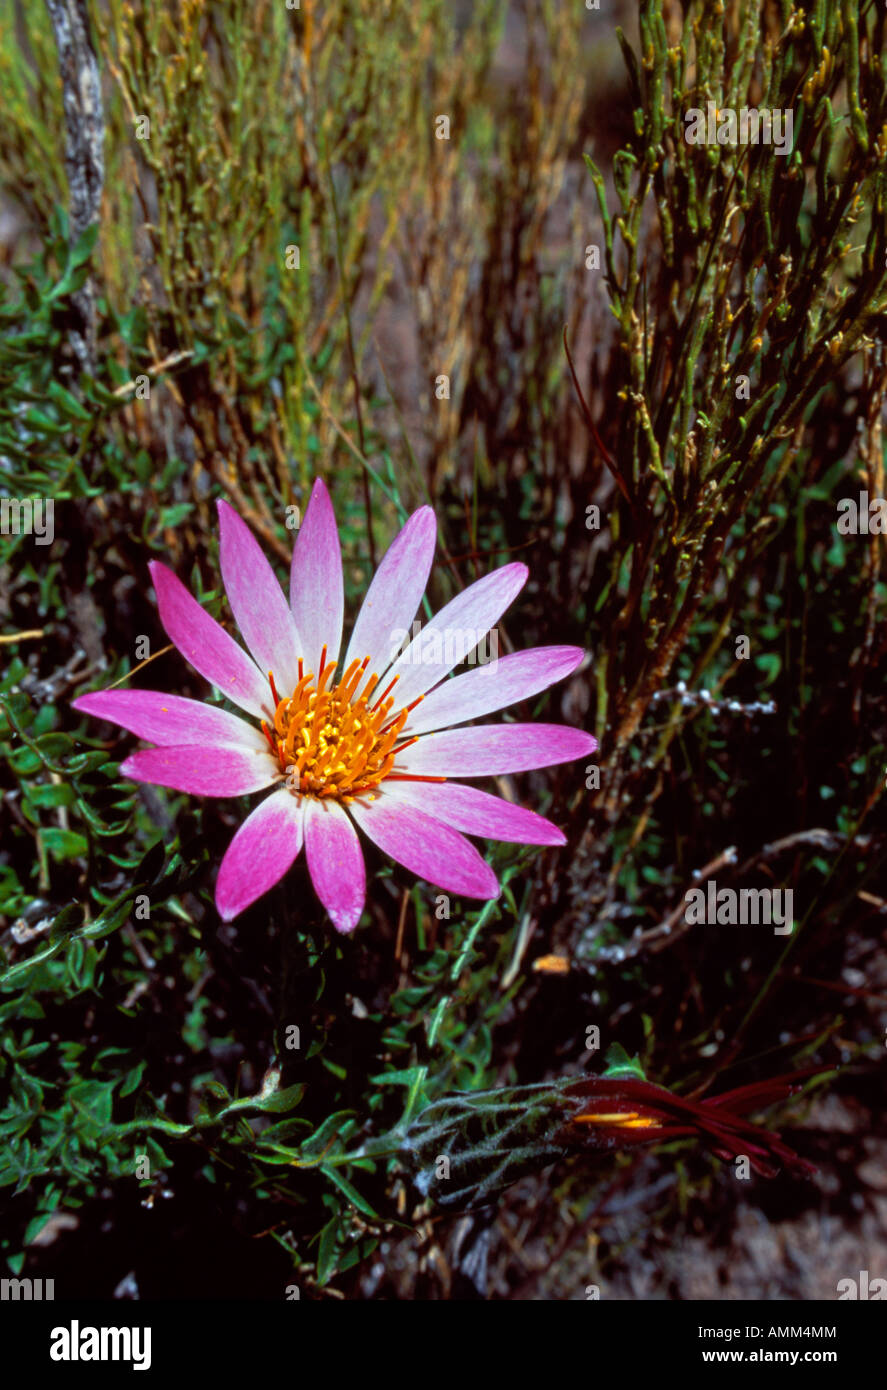 A pink mutisia flower from the asteraceae genus Stock Photo